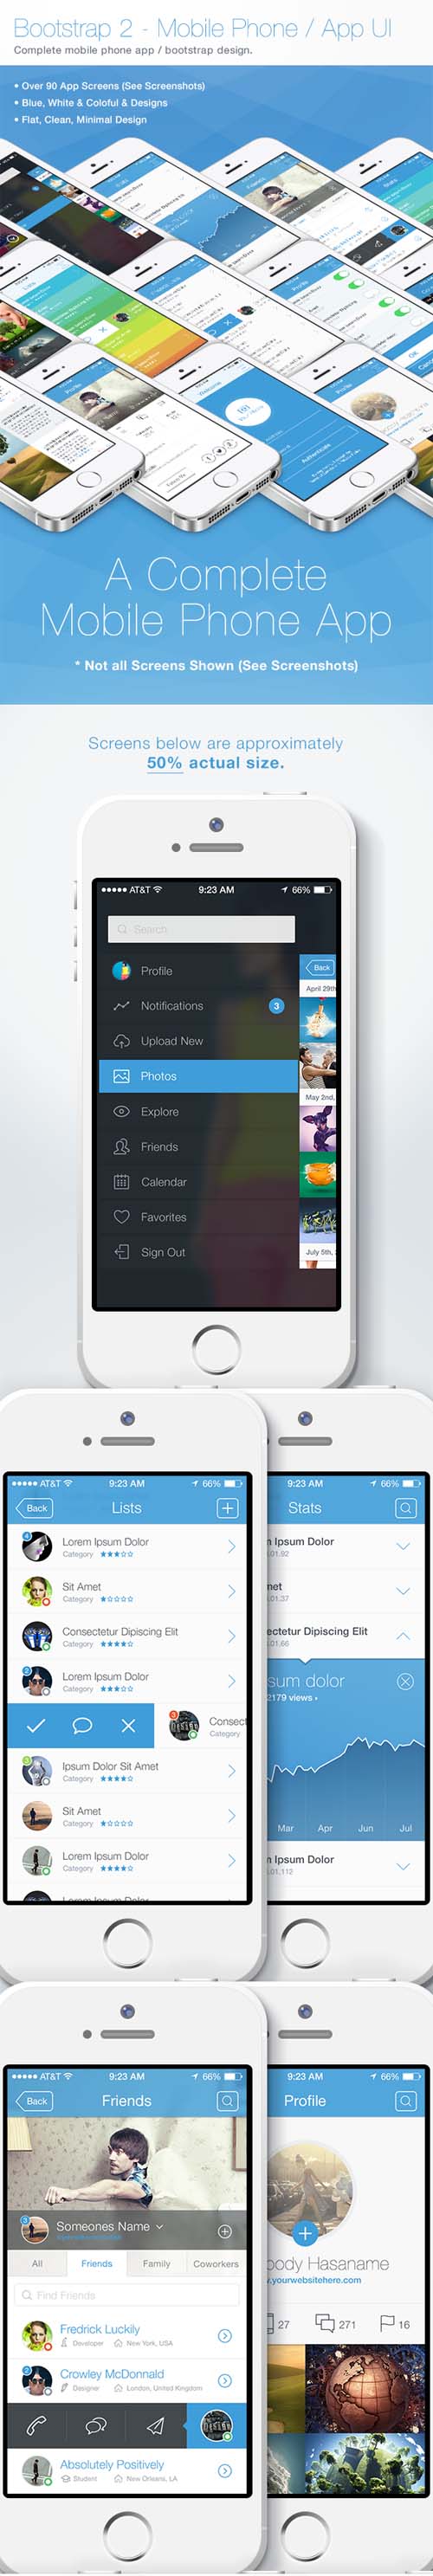 iPhone App Bootstrap 2 iOS 7-8